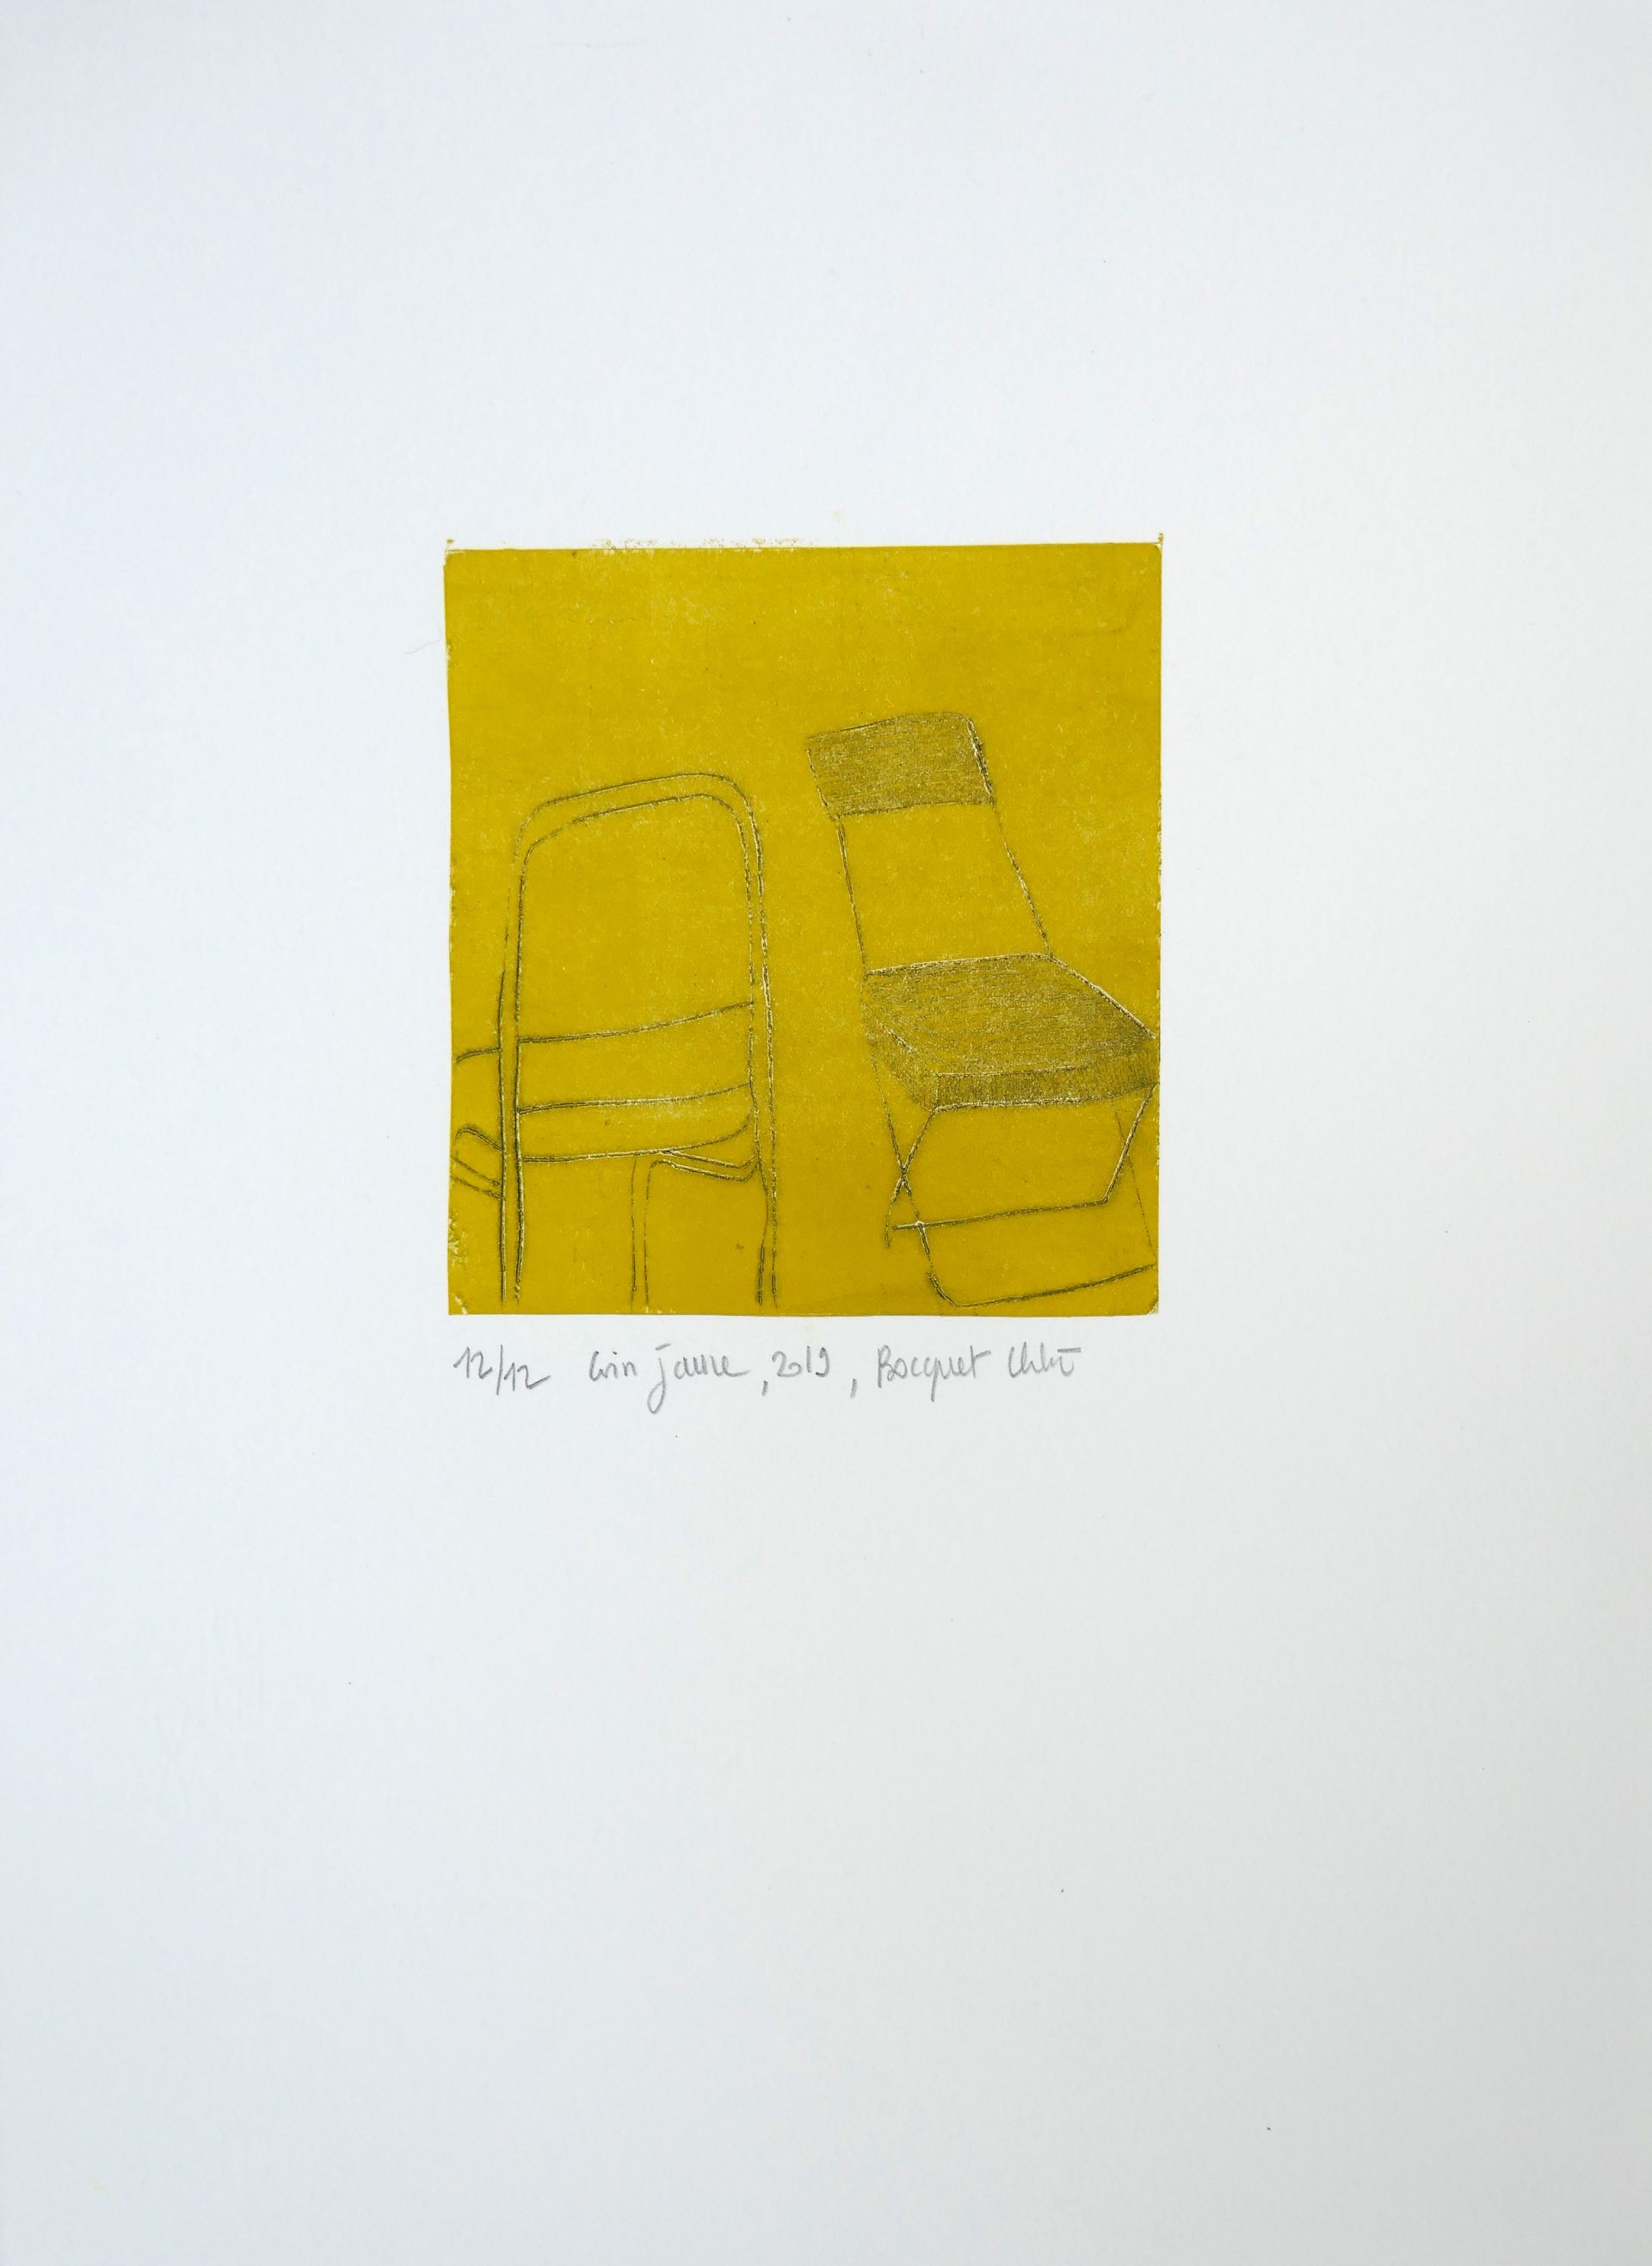 Coin jaune, 2019, drypoint, image size 12,5x12 cm, paper size 38x28 cm, edition of 12